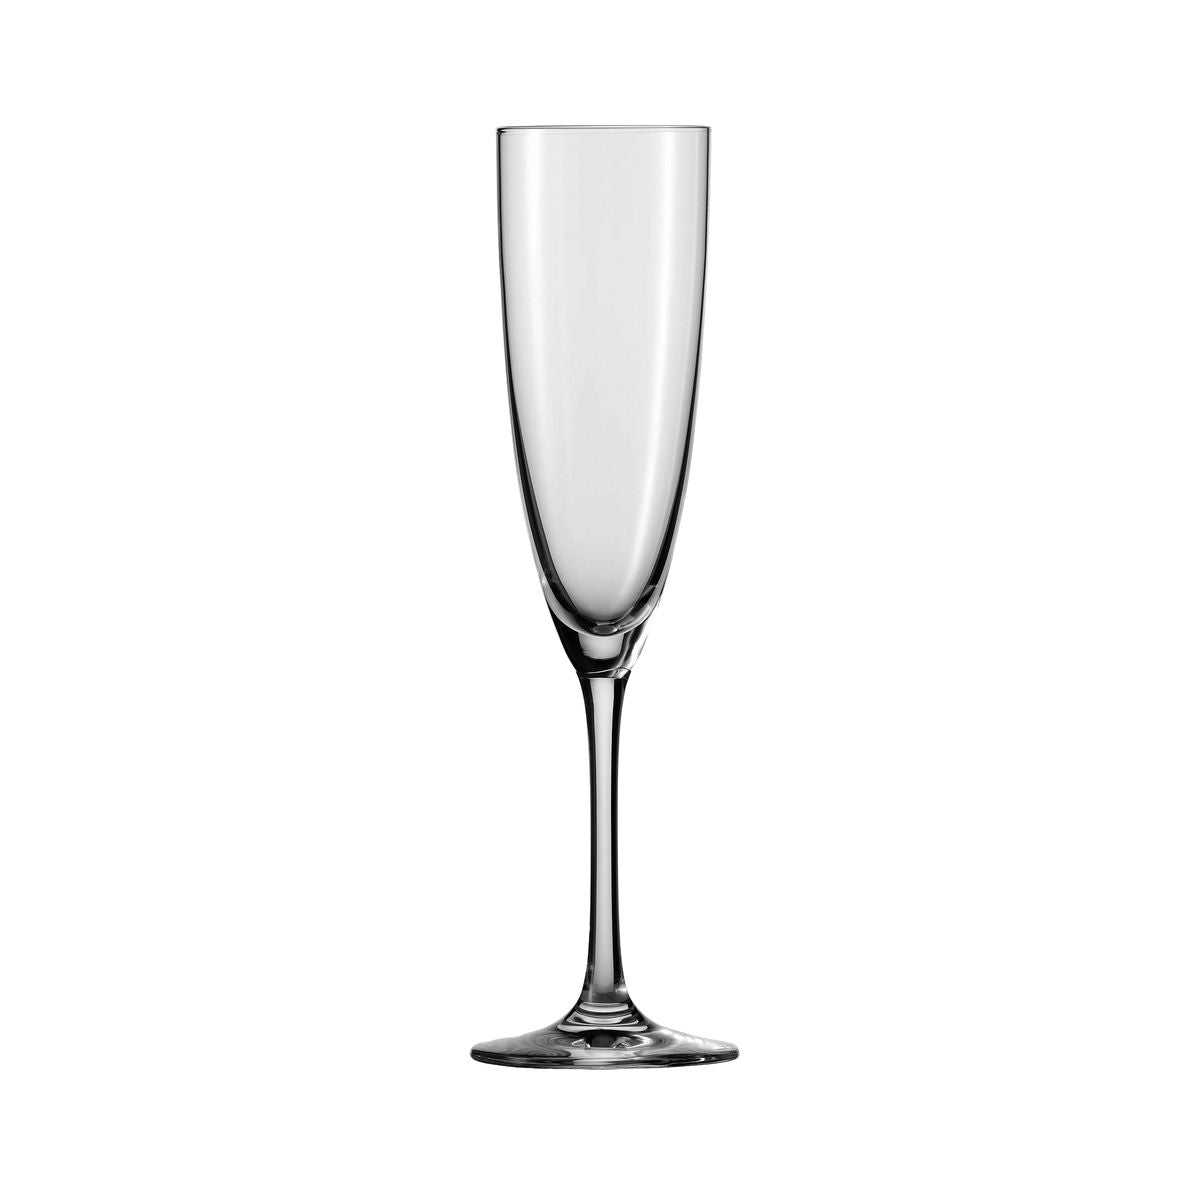 Flute Champagne Glass - 210Ml, Classico from Schott Zwiesel. made out of Glass and sold in boxes of 6. Hospitality quality at wholesale price with The Flying Fork! 